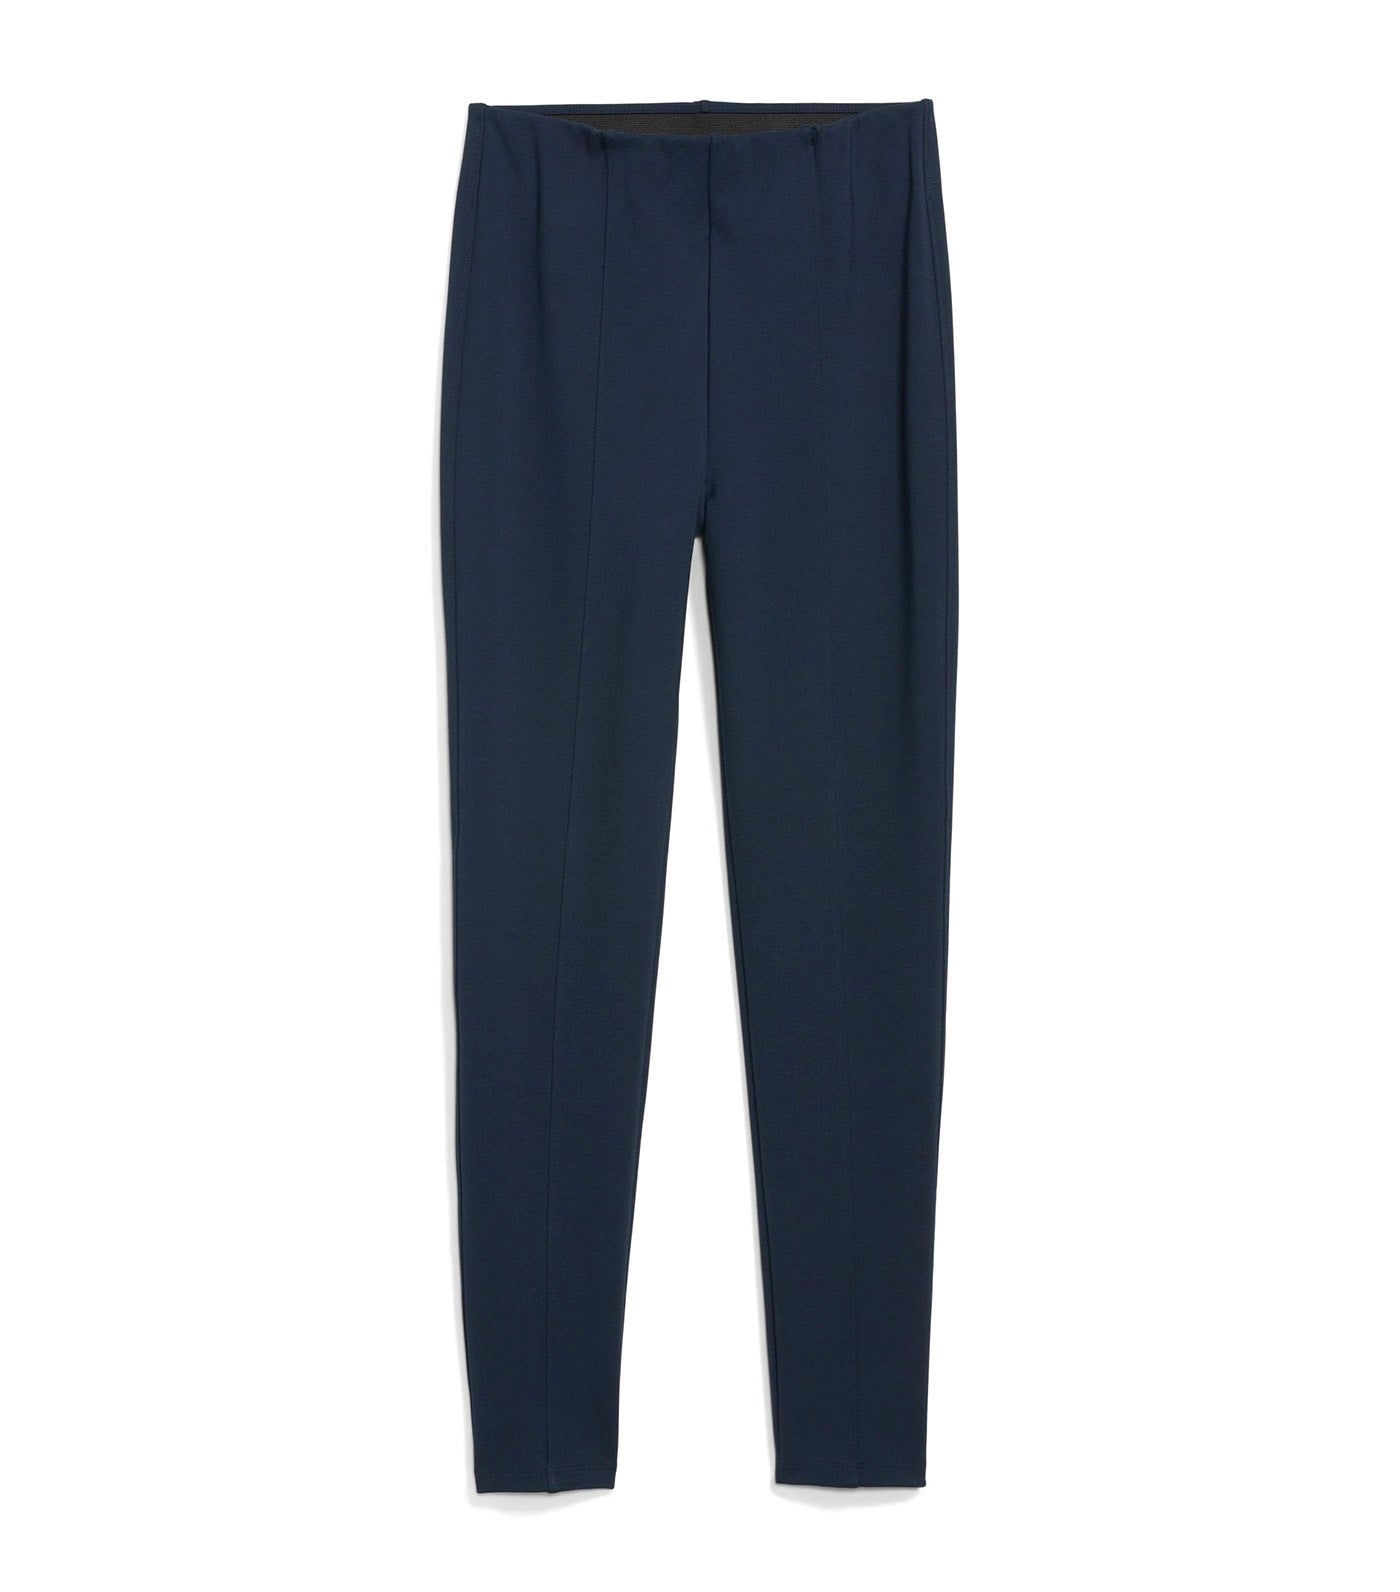 Extra High-Waisted Stevie Skinny Ankle Pants for Women In The Navy